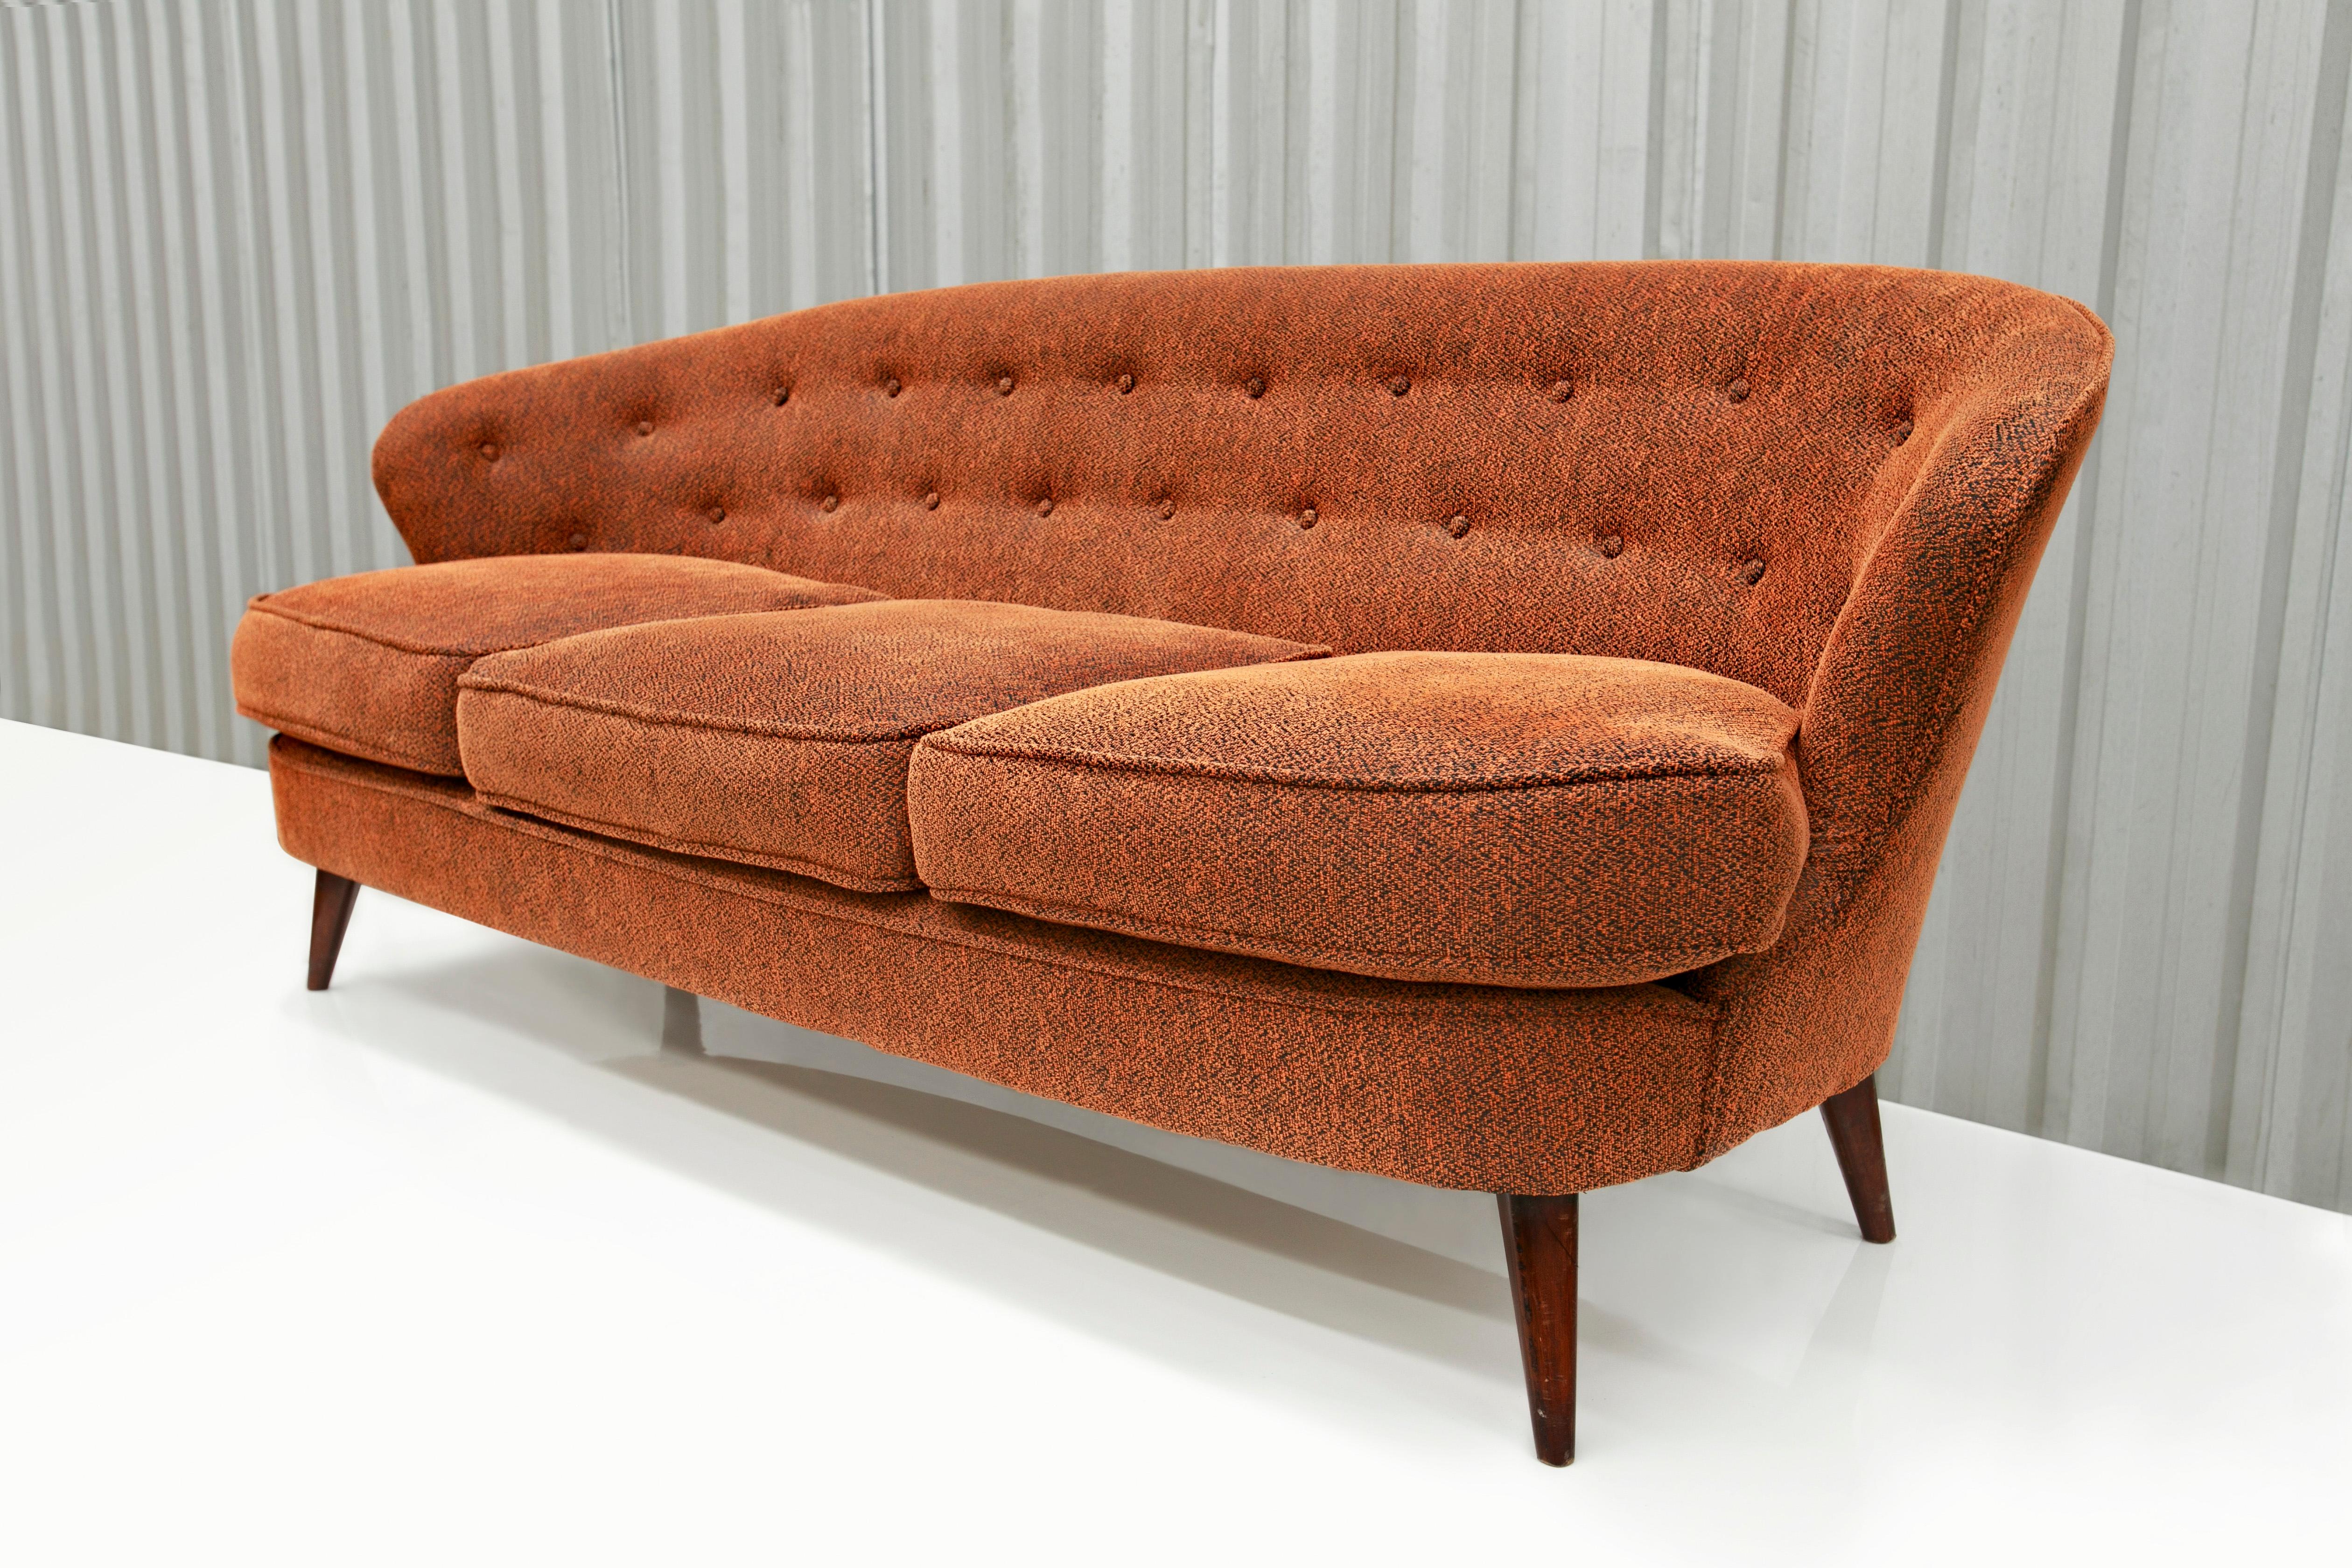 Available right now, this beautiful Brazilian modern sofa, designed by Joaquim Tenreiro in the sixties, is absolutely stunning. The model is called “Concha,” which translates to “shell” in Portuguese. The sofa features a hardwood structure,